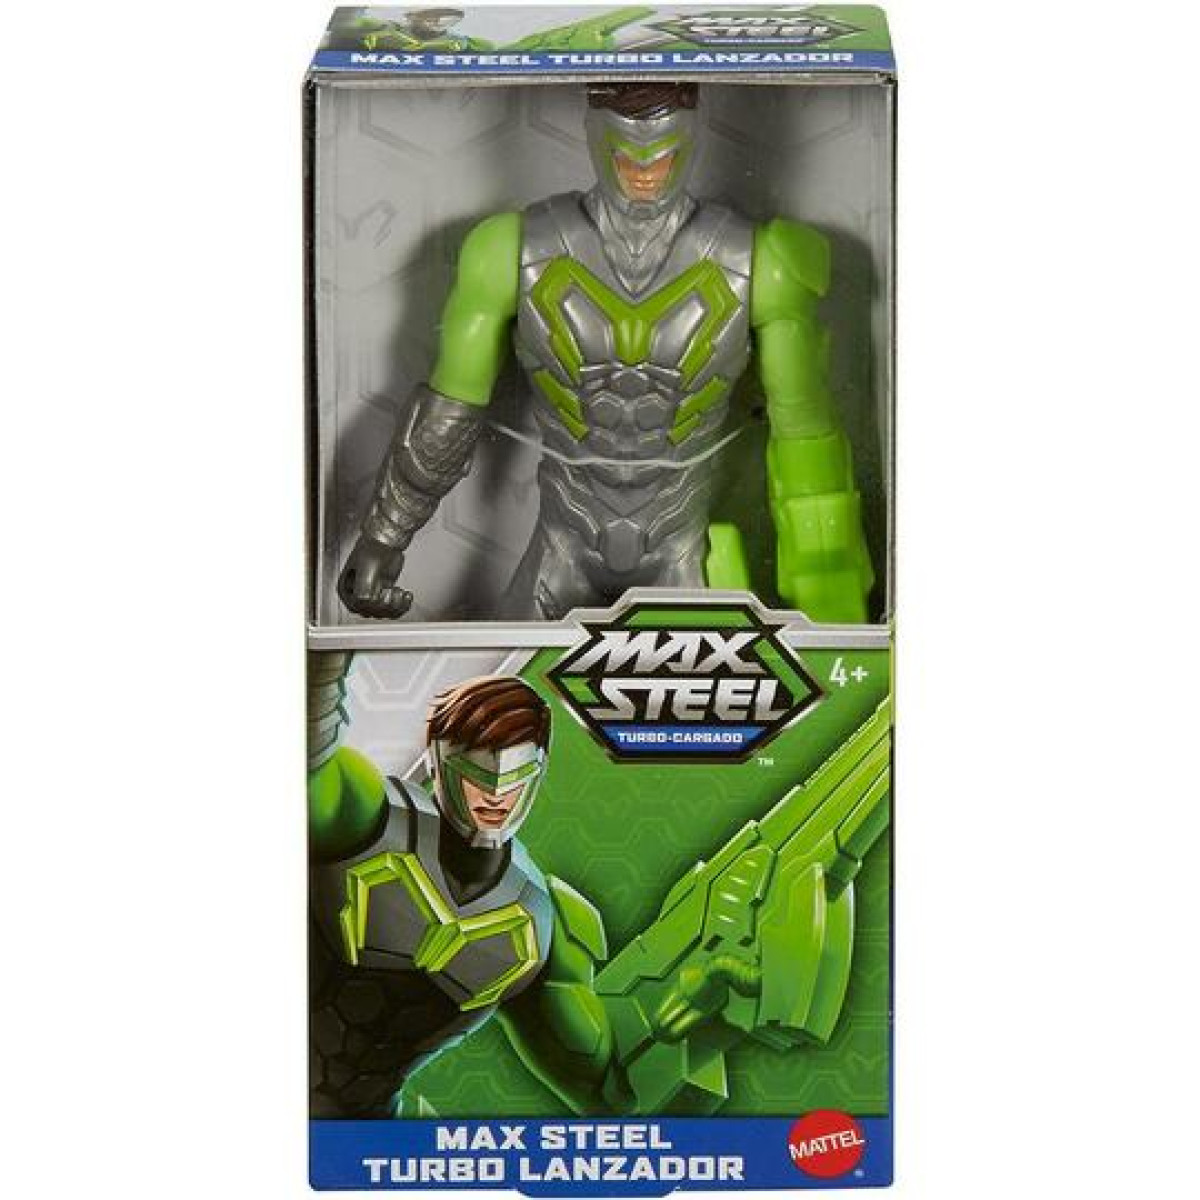 MAX STEEL TURBO IMPACTO ASST DXN41